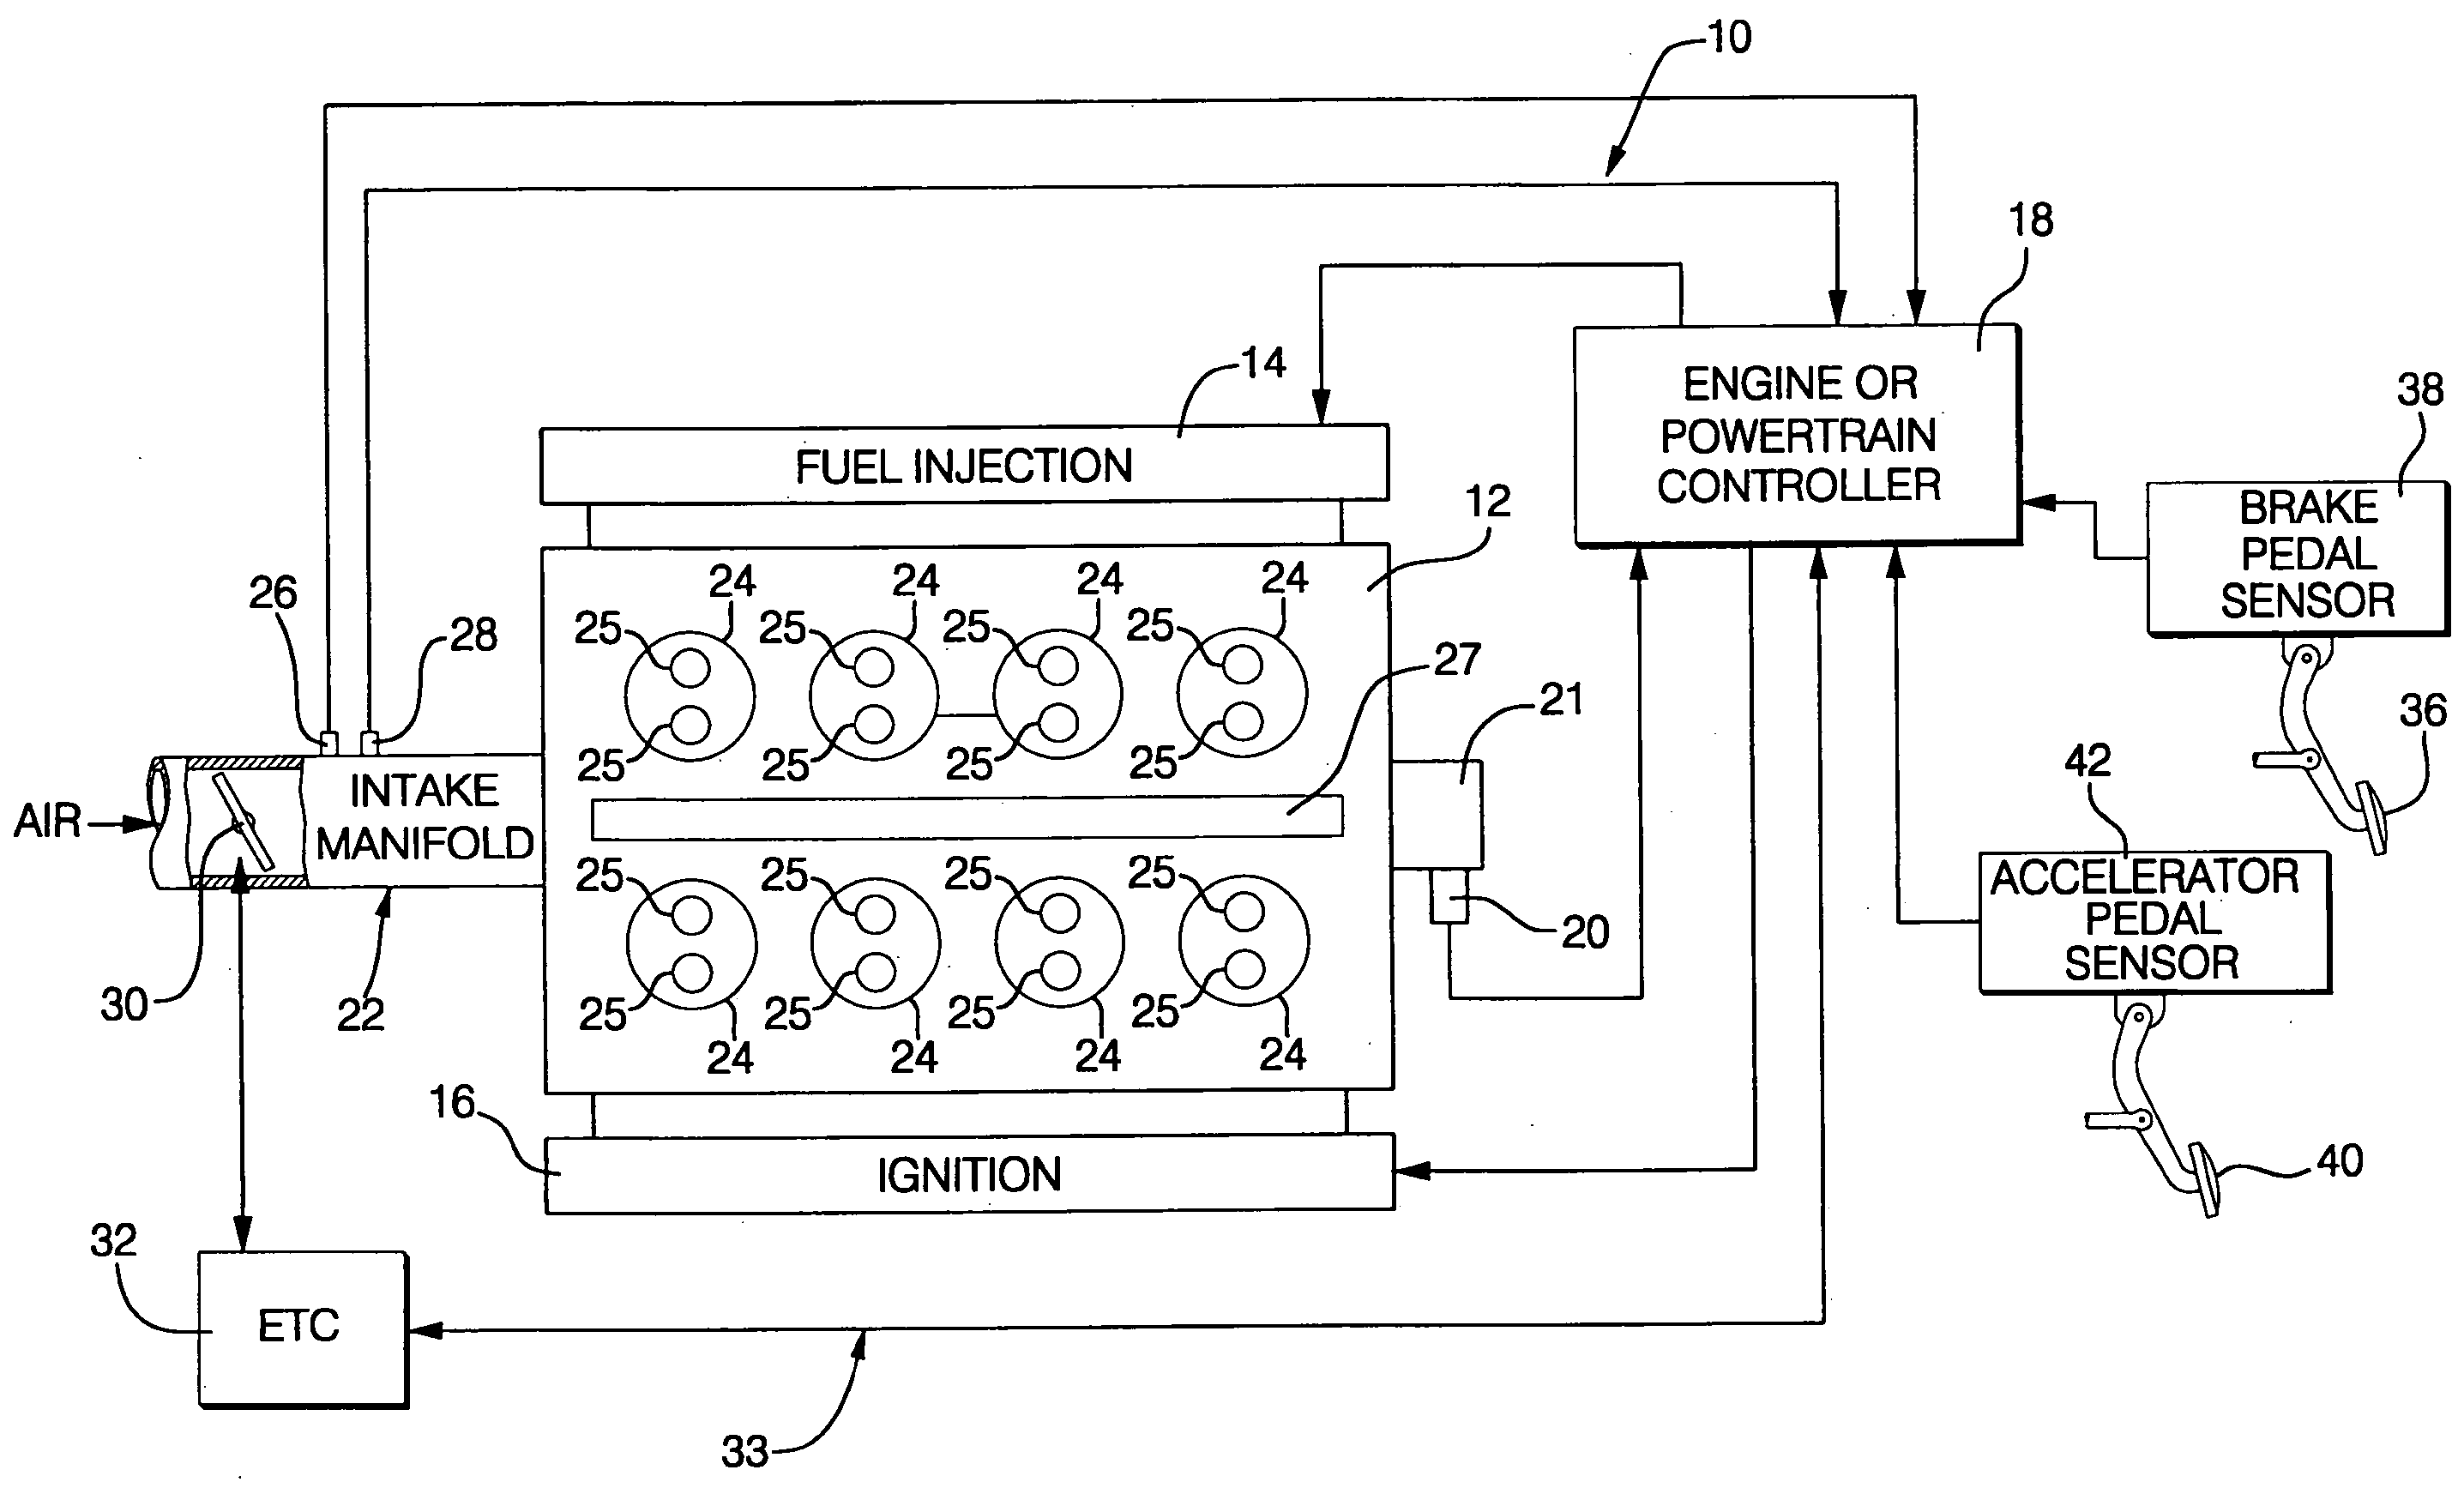 Adaptable modification of cylinder deactivation threshold